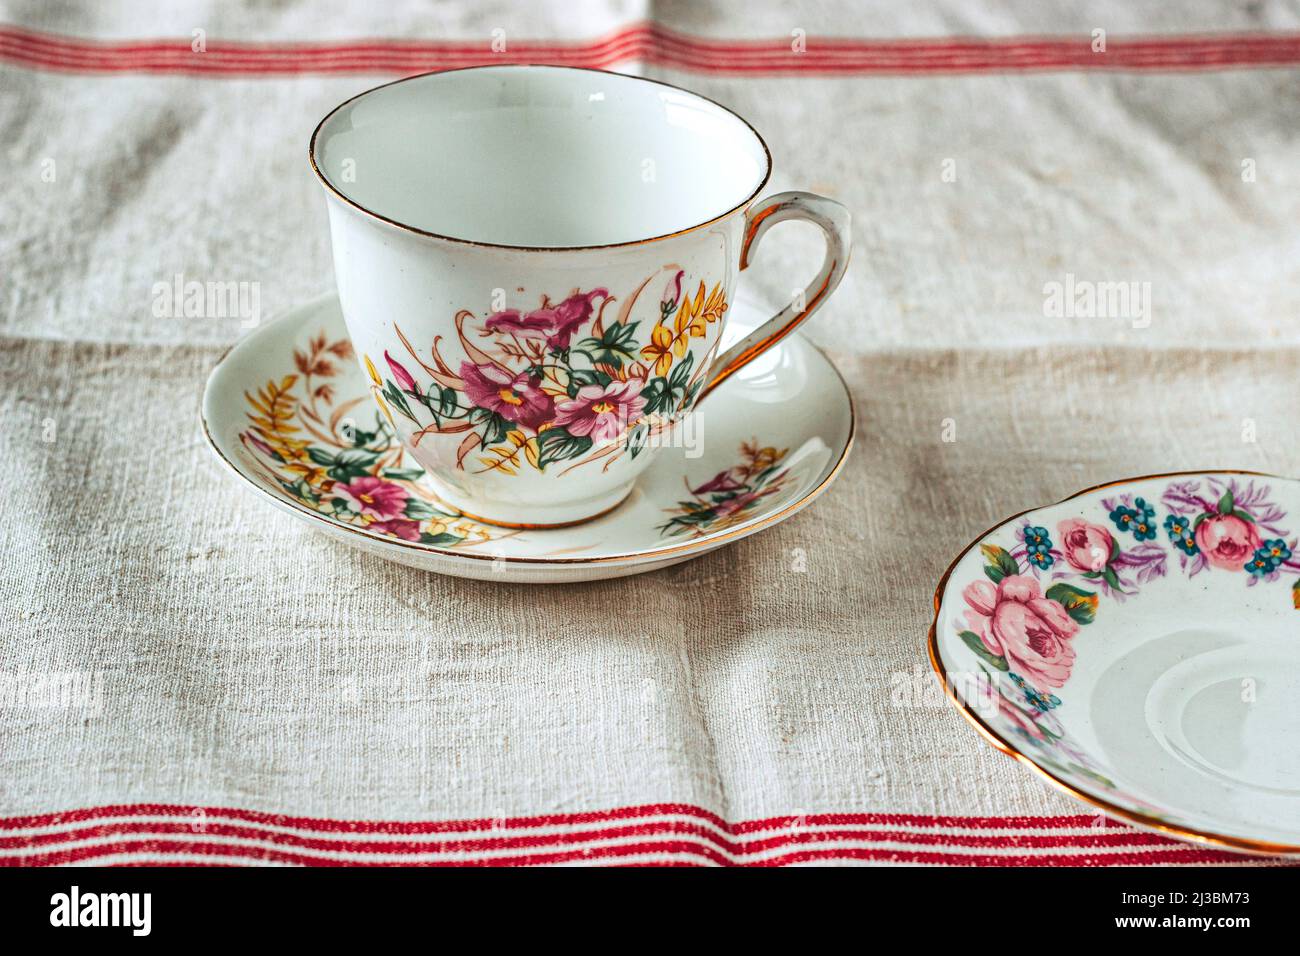 Vintage Teacup and Saucer Stock Photo